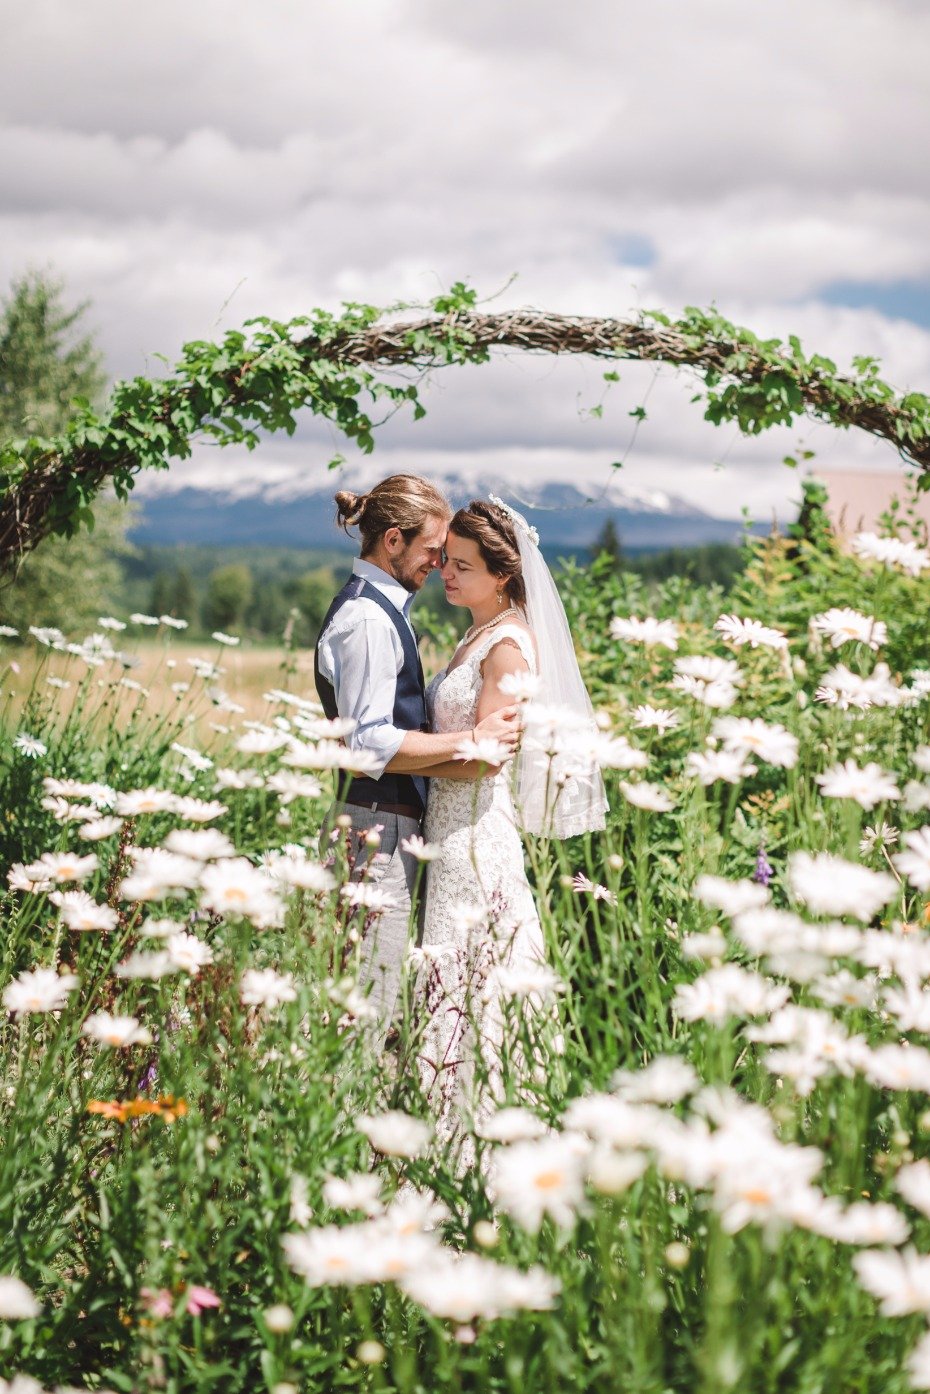 Get married in a field of daisies